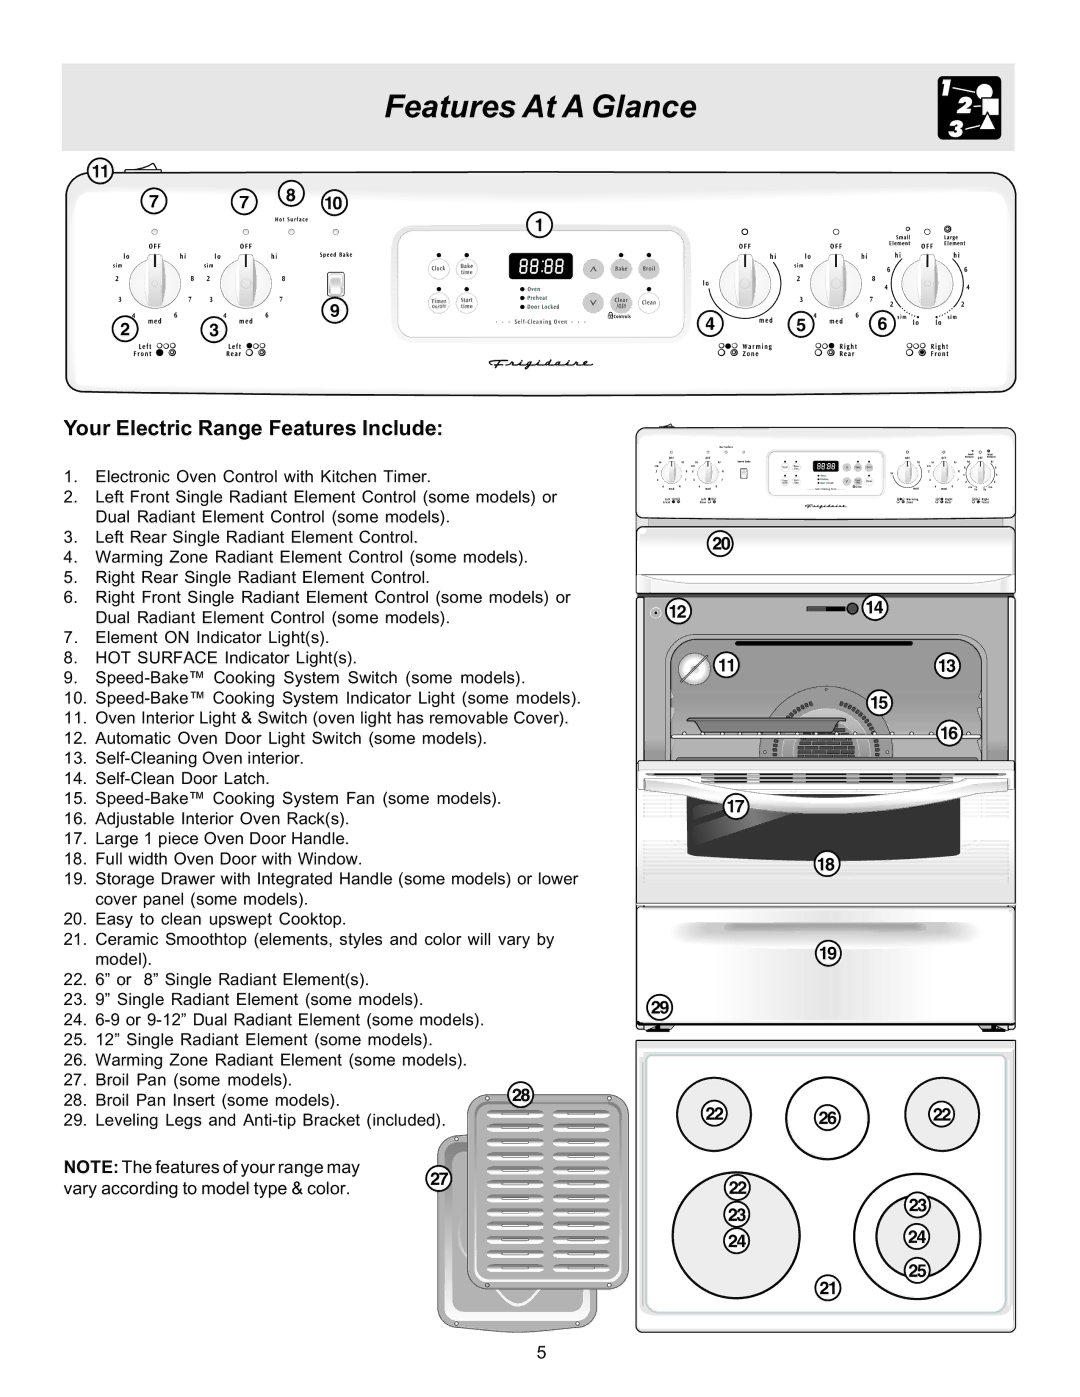 Frigidaire 316423411 important safety instructions Features At a Glance, Your Electric Range Features Include 